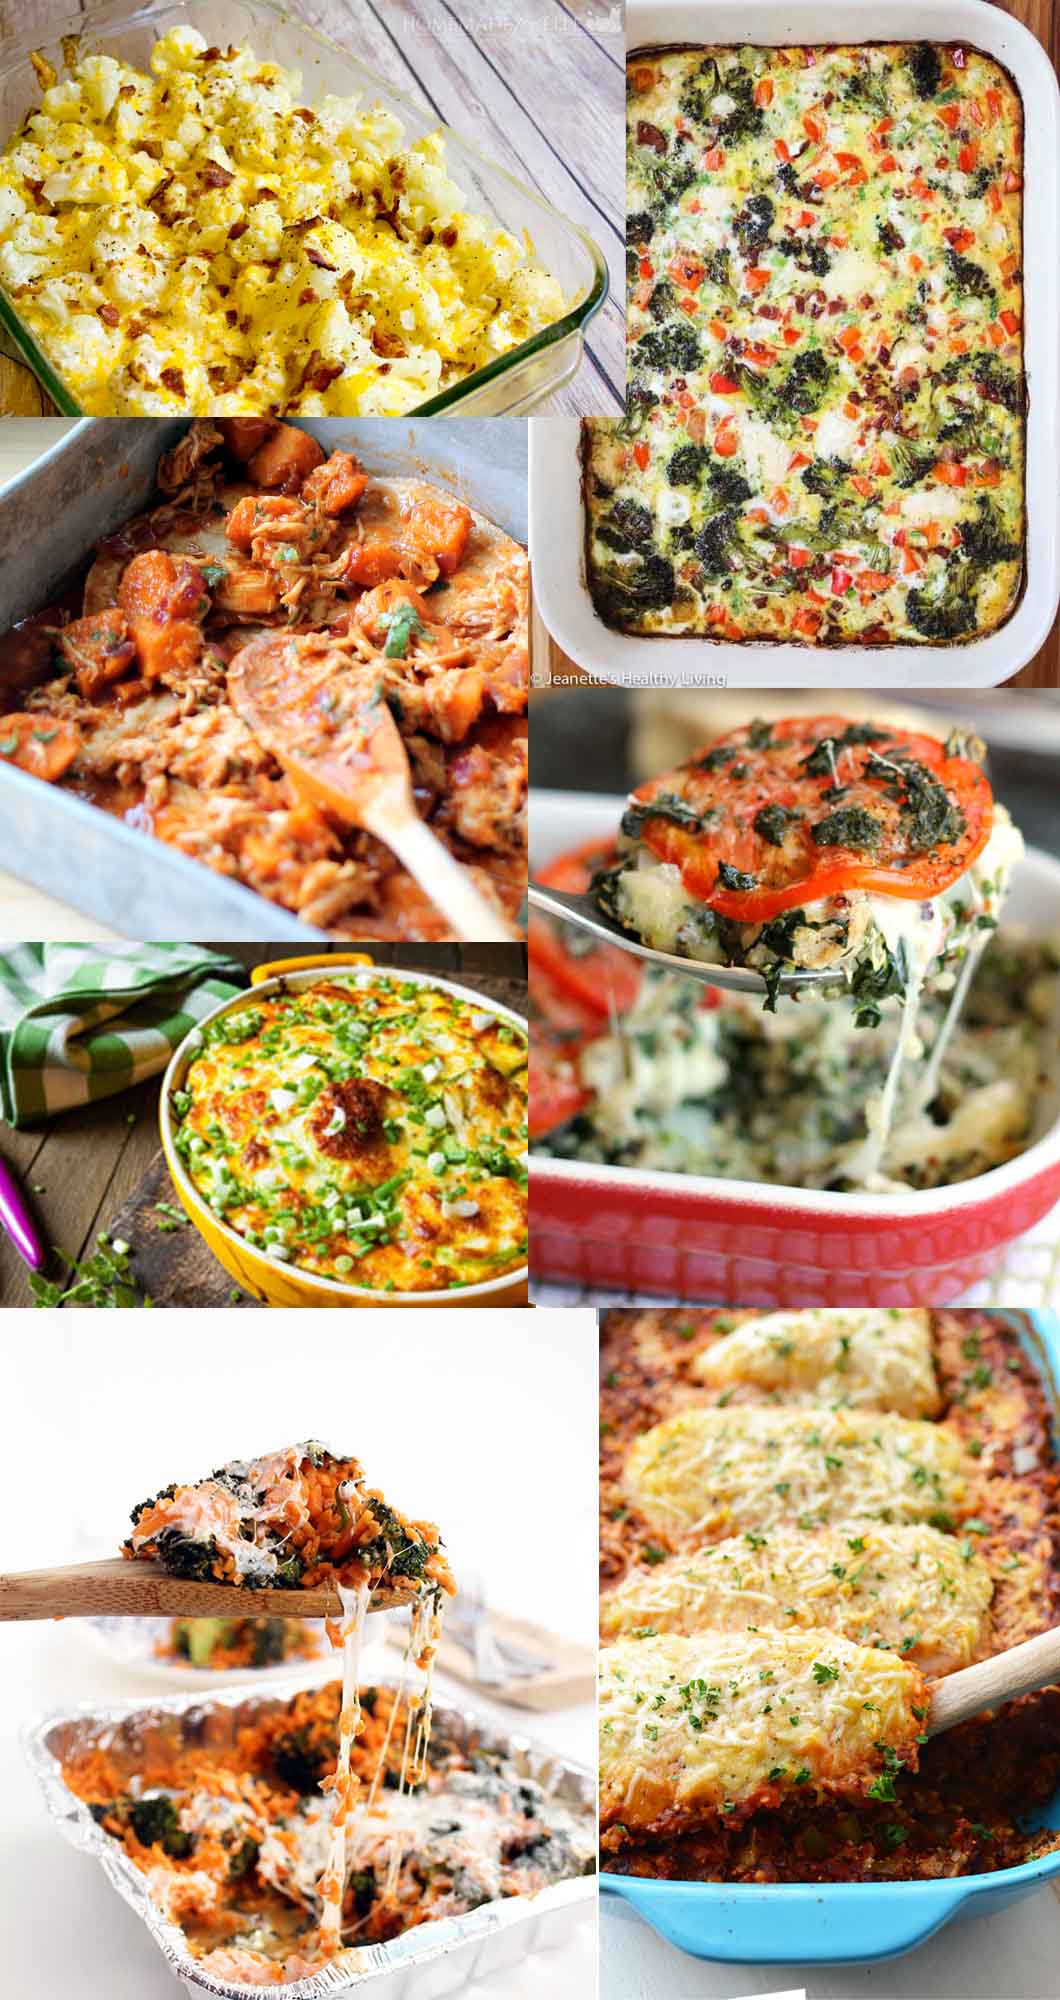 20 Healthy Casseroles For Your Whole Family